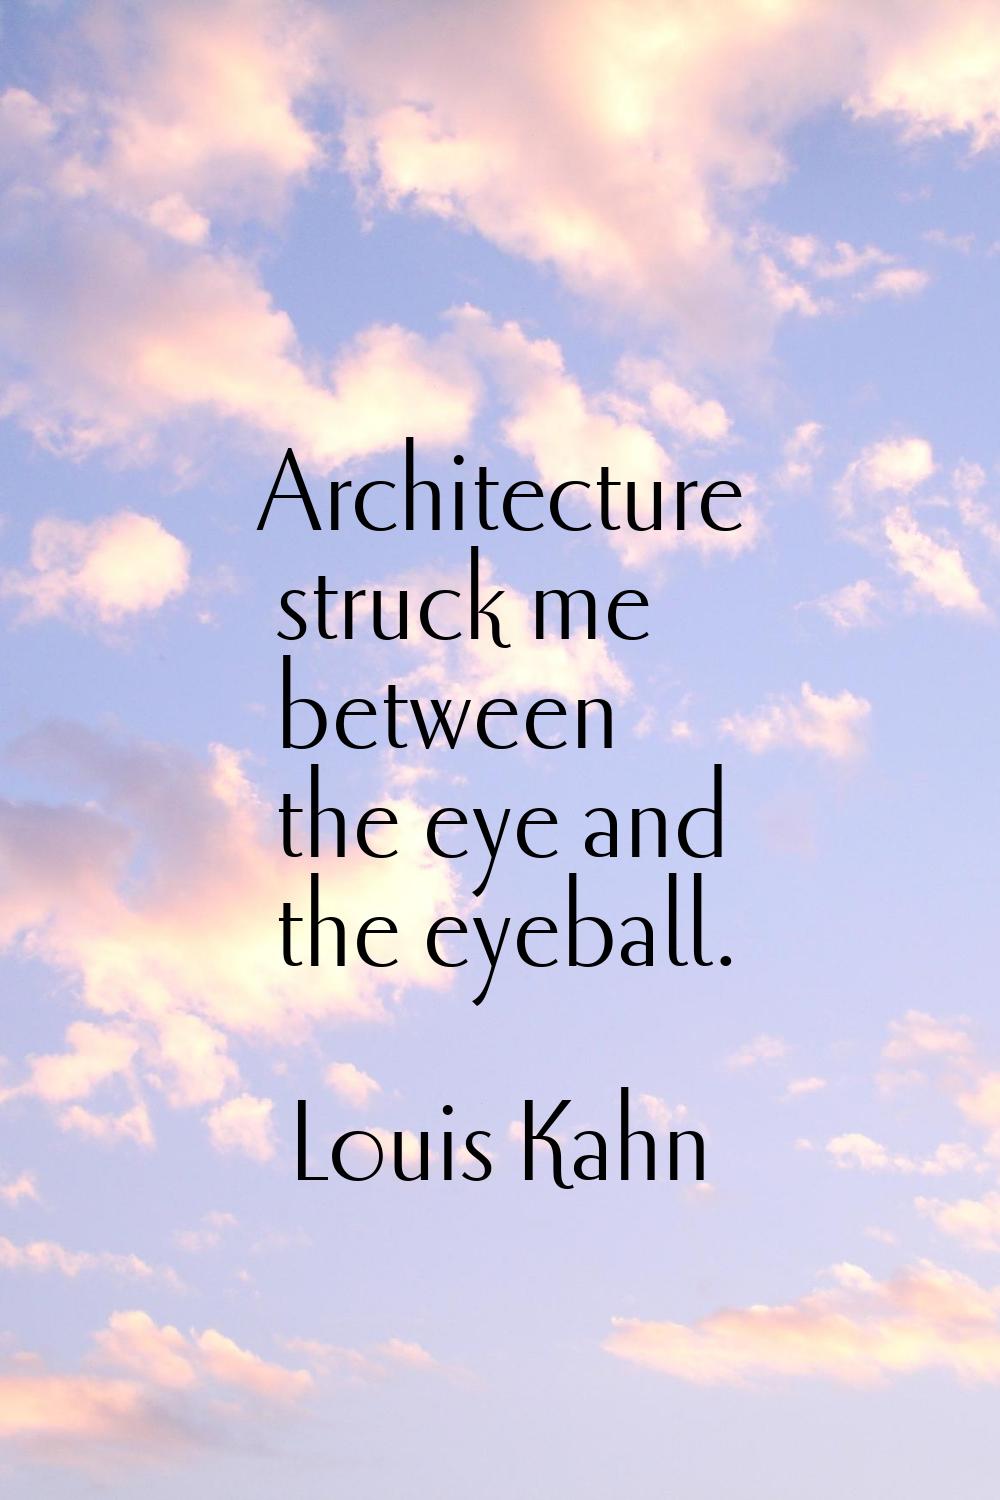 Architecture struck me between the eye and the eyeball.